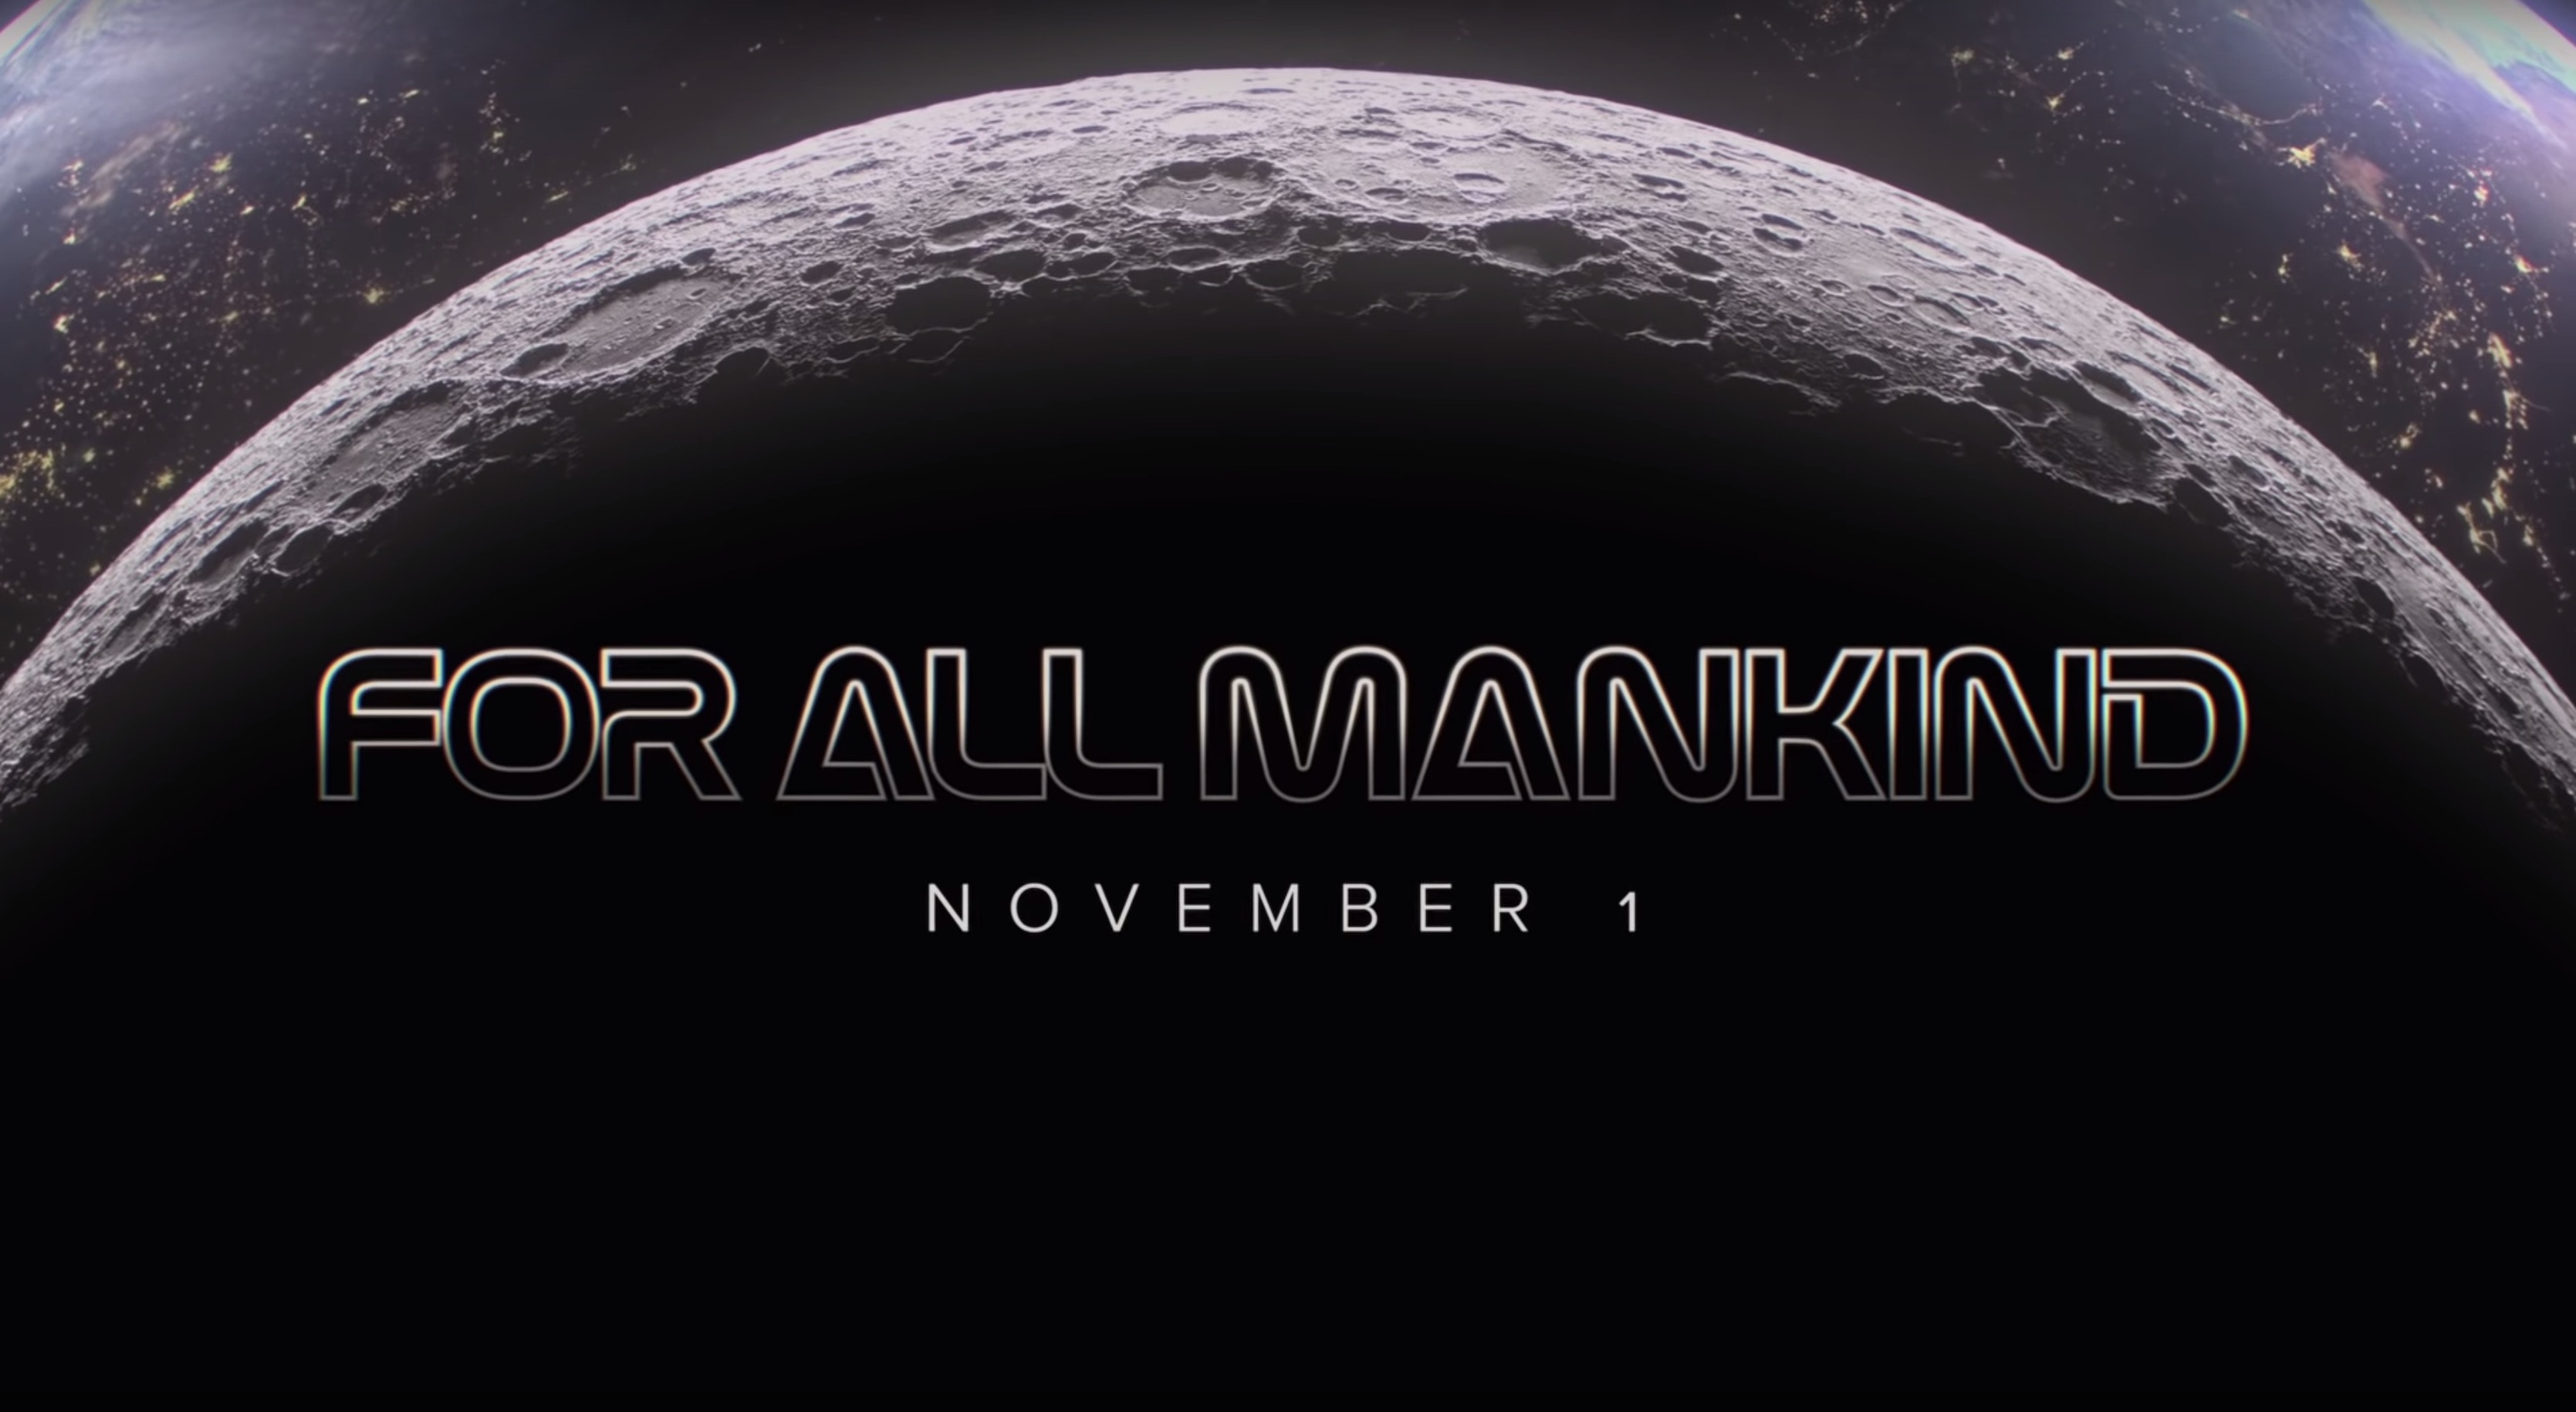 Official For All Mankind trailer gives biggest glimpse of spacey plot ...